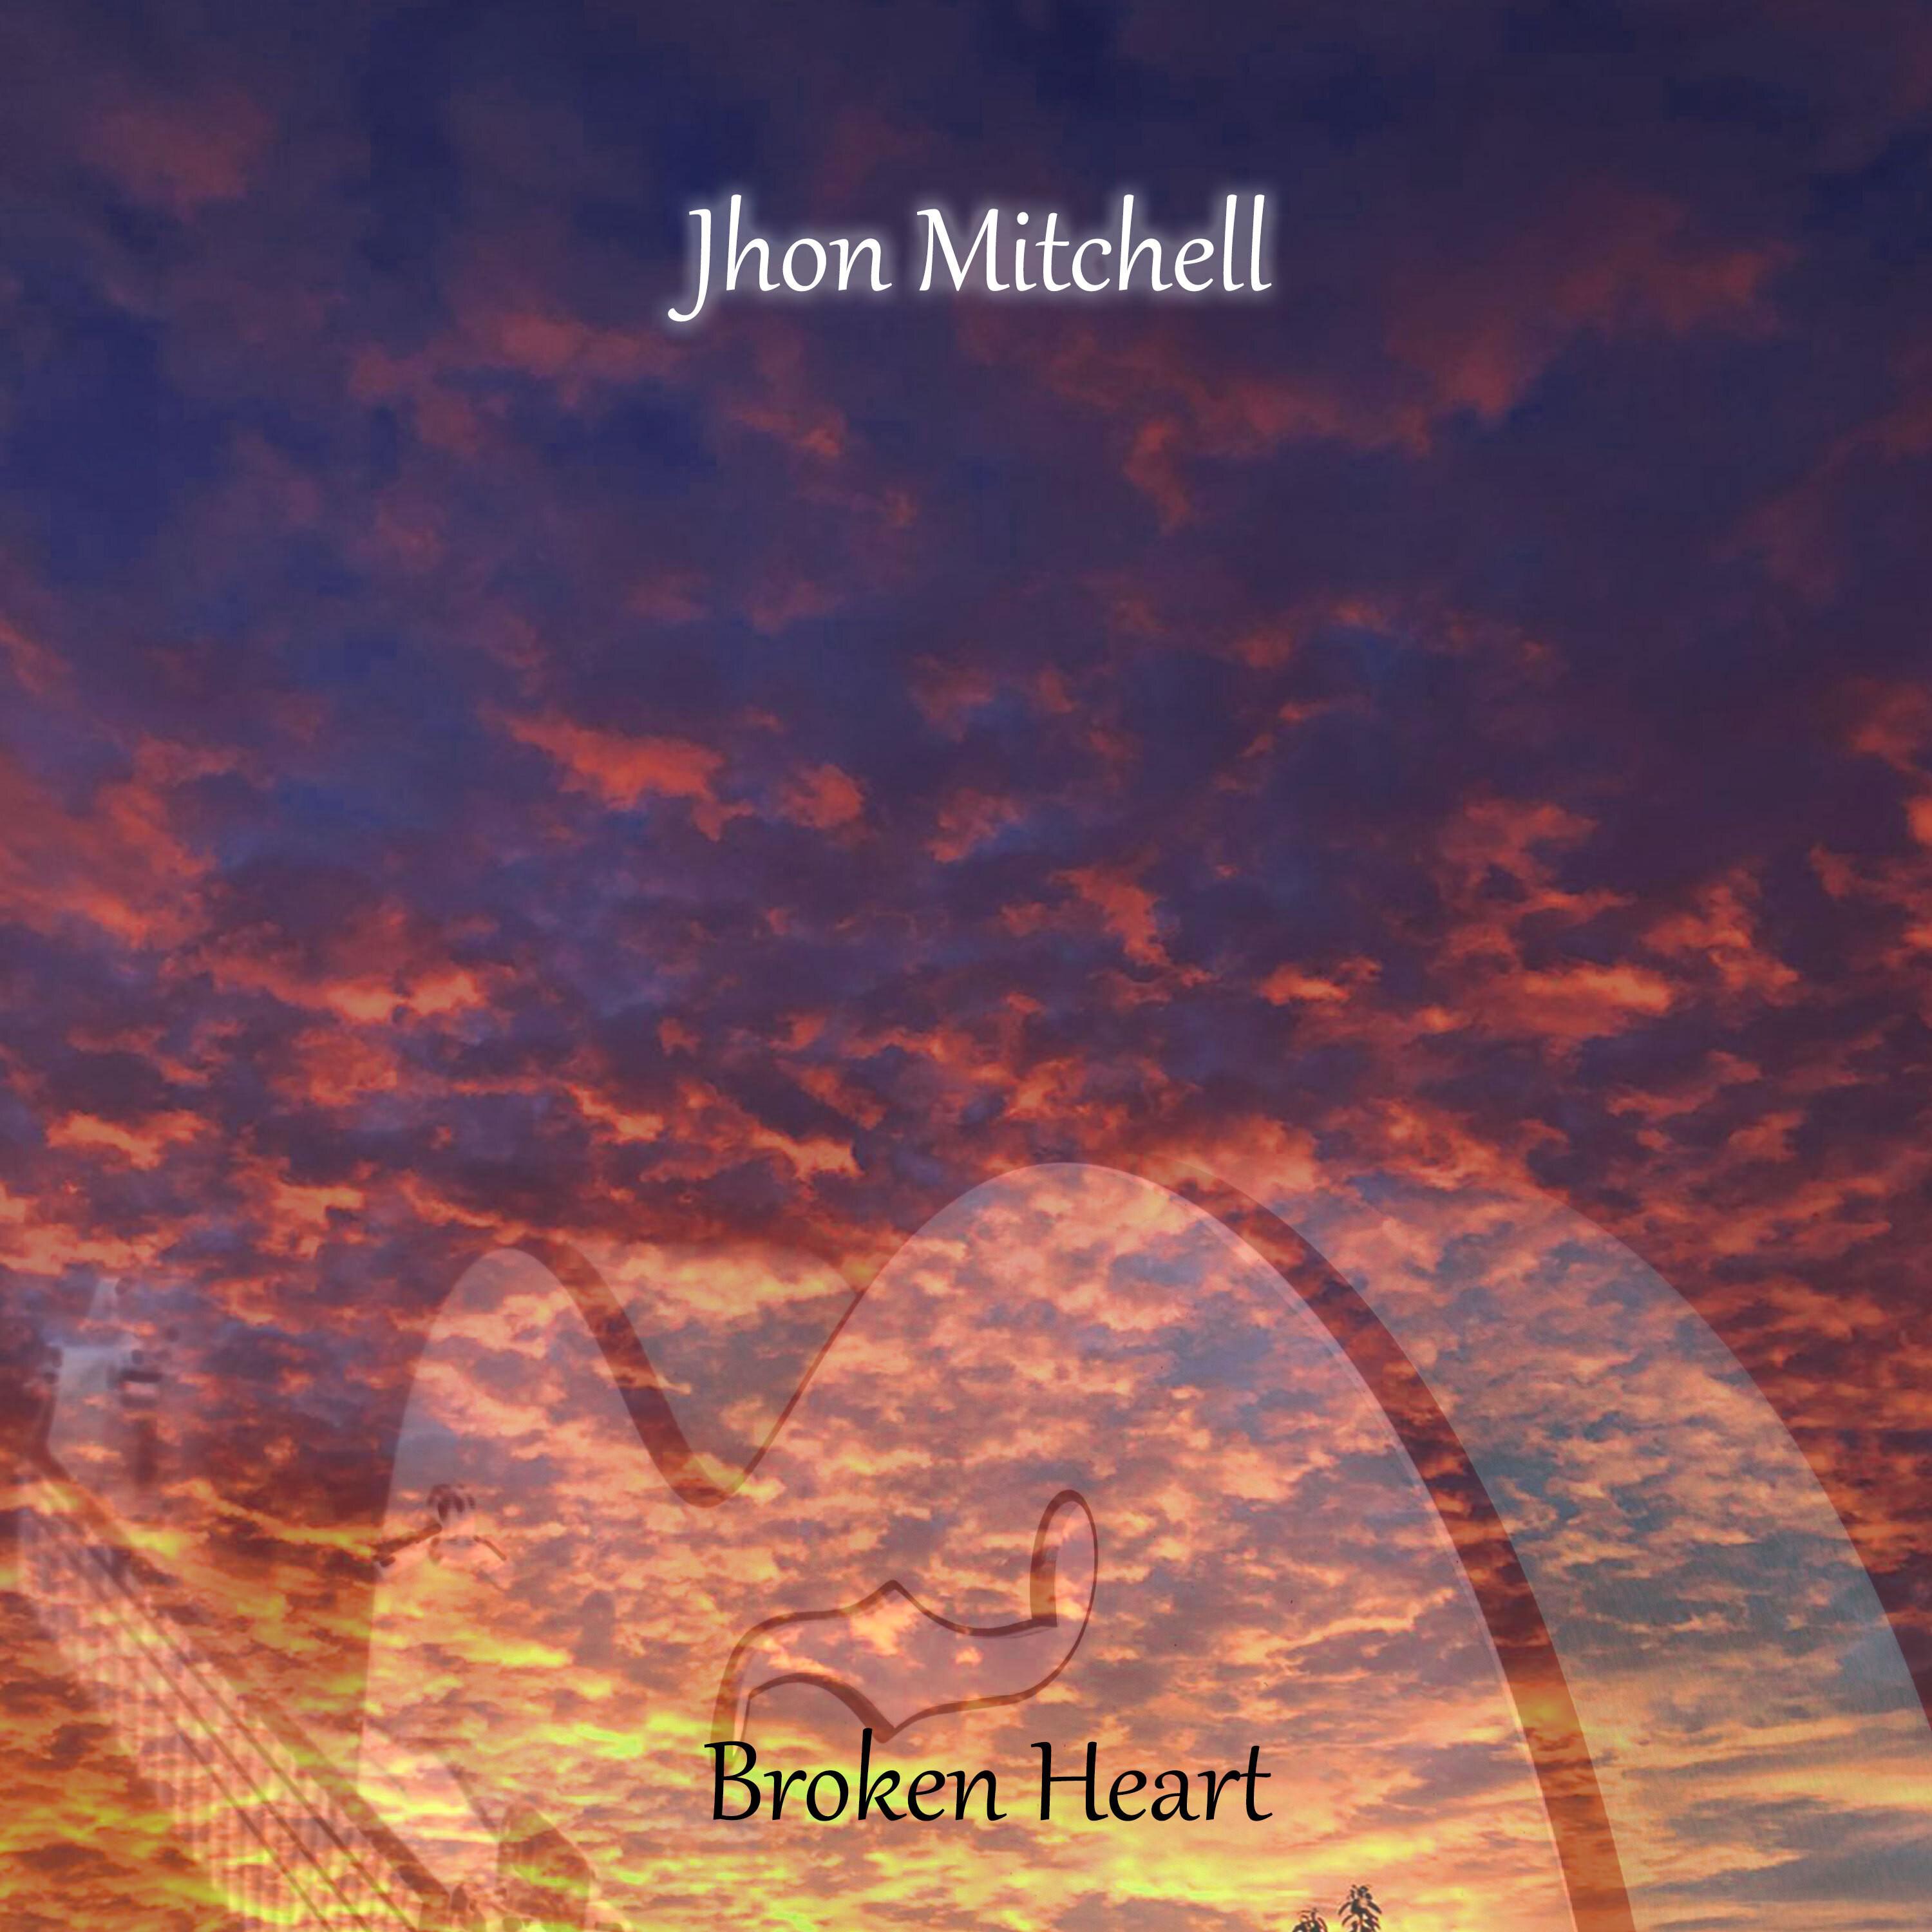 Jhon Mitchell - Silling over the Hill